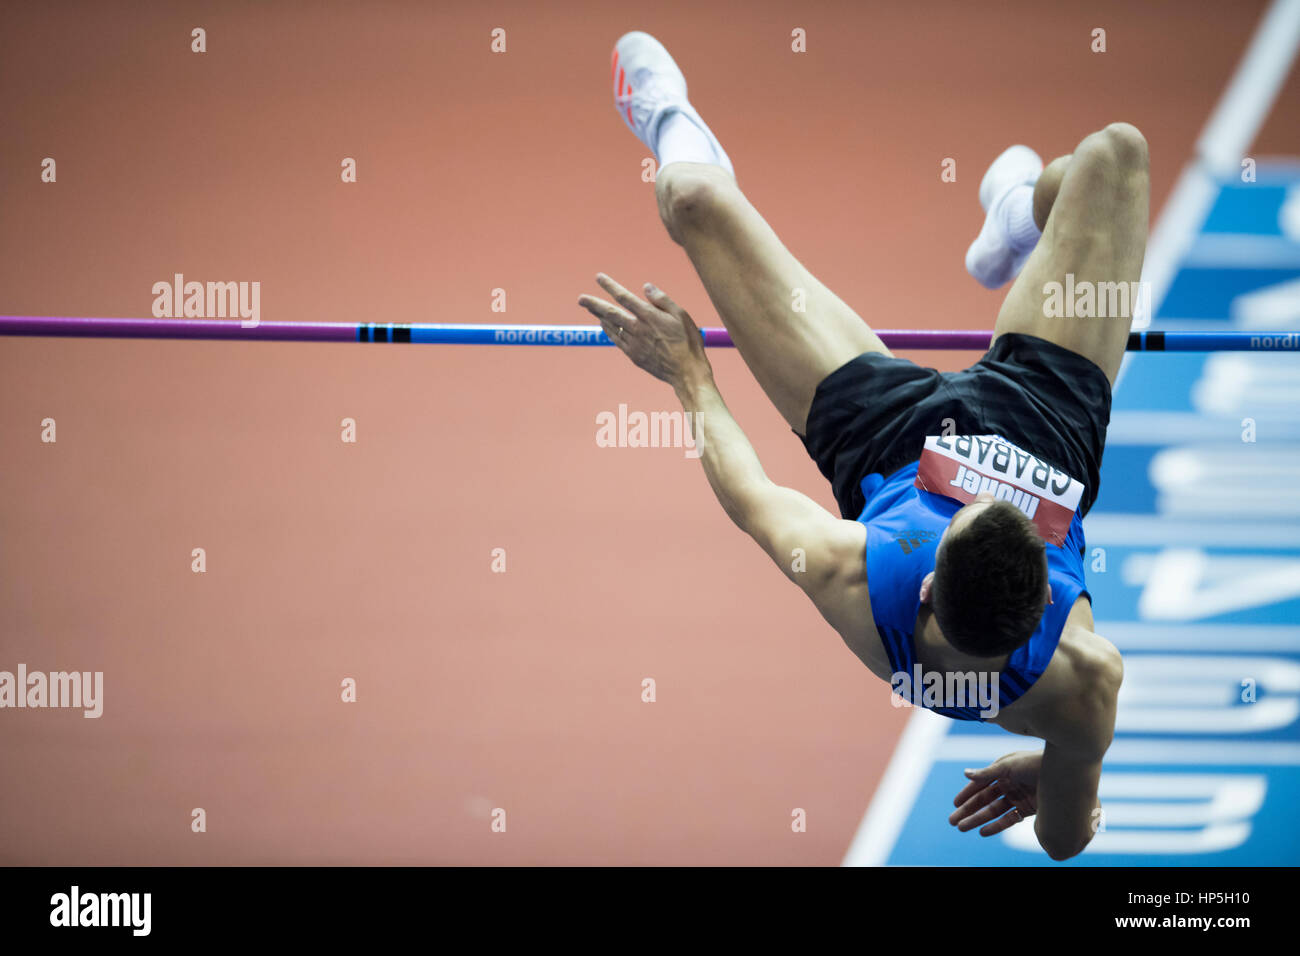 Birmingham, UK. 18th Feb, 2017. Robbie Grabarz competes in the high jump during the Muller Indoor Grand Prix Birmingham at the NIA, Birmingham, UK, on 18 February 2017. Credit: Andrew Peat/Alamy Live News Stock Photo